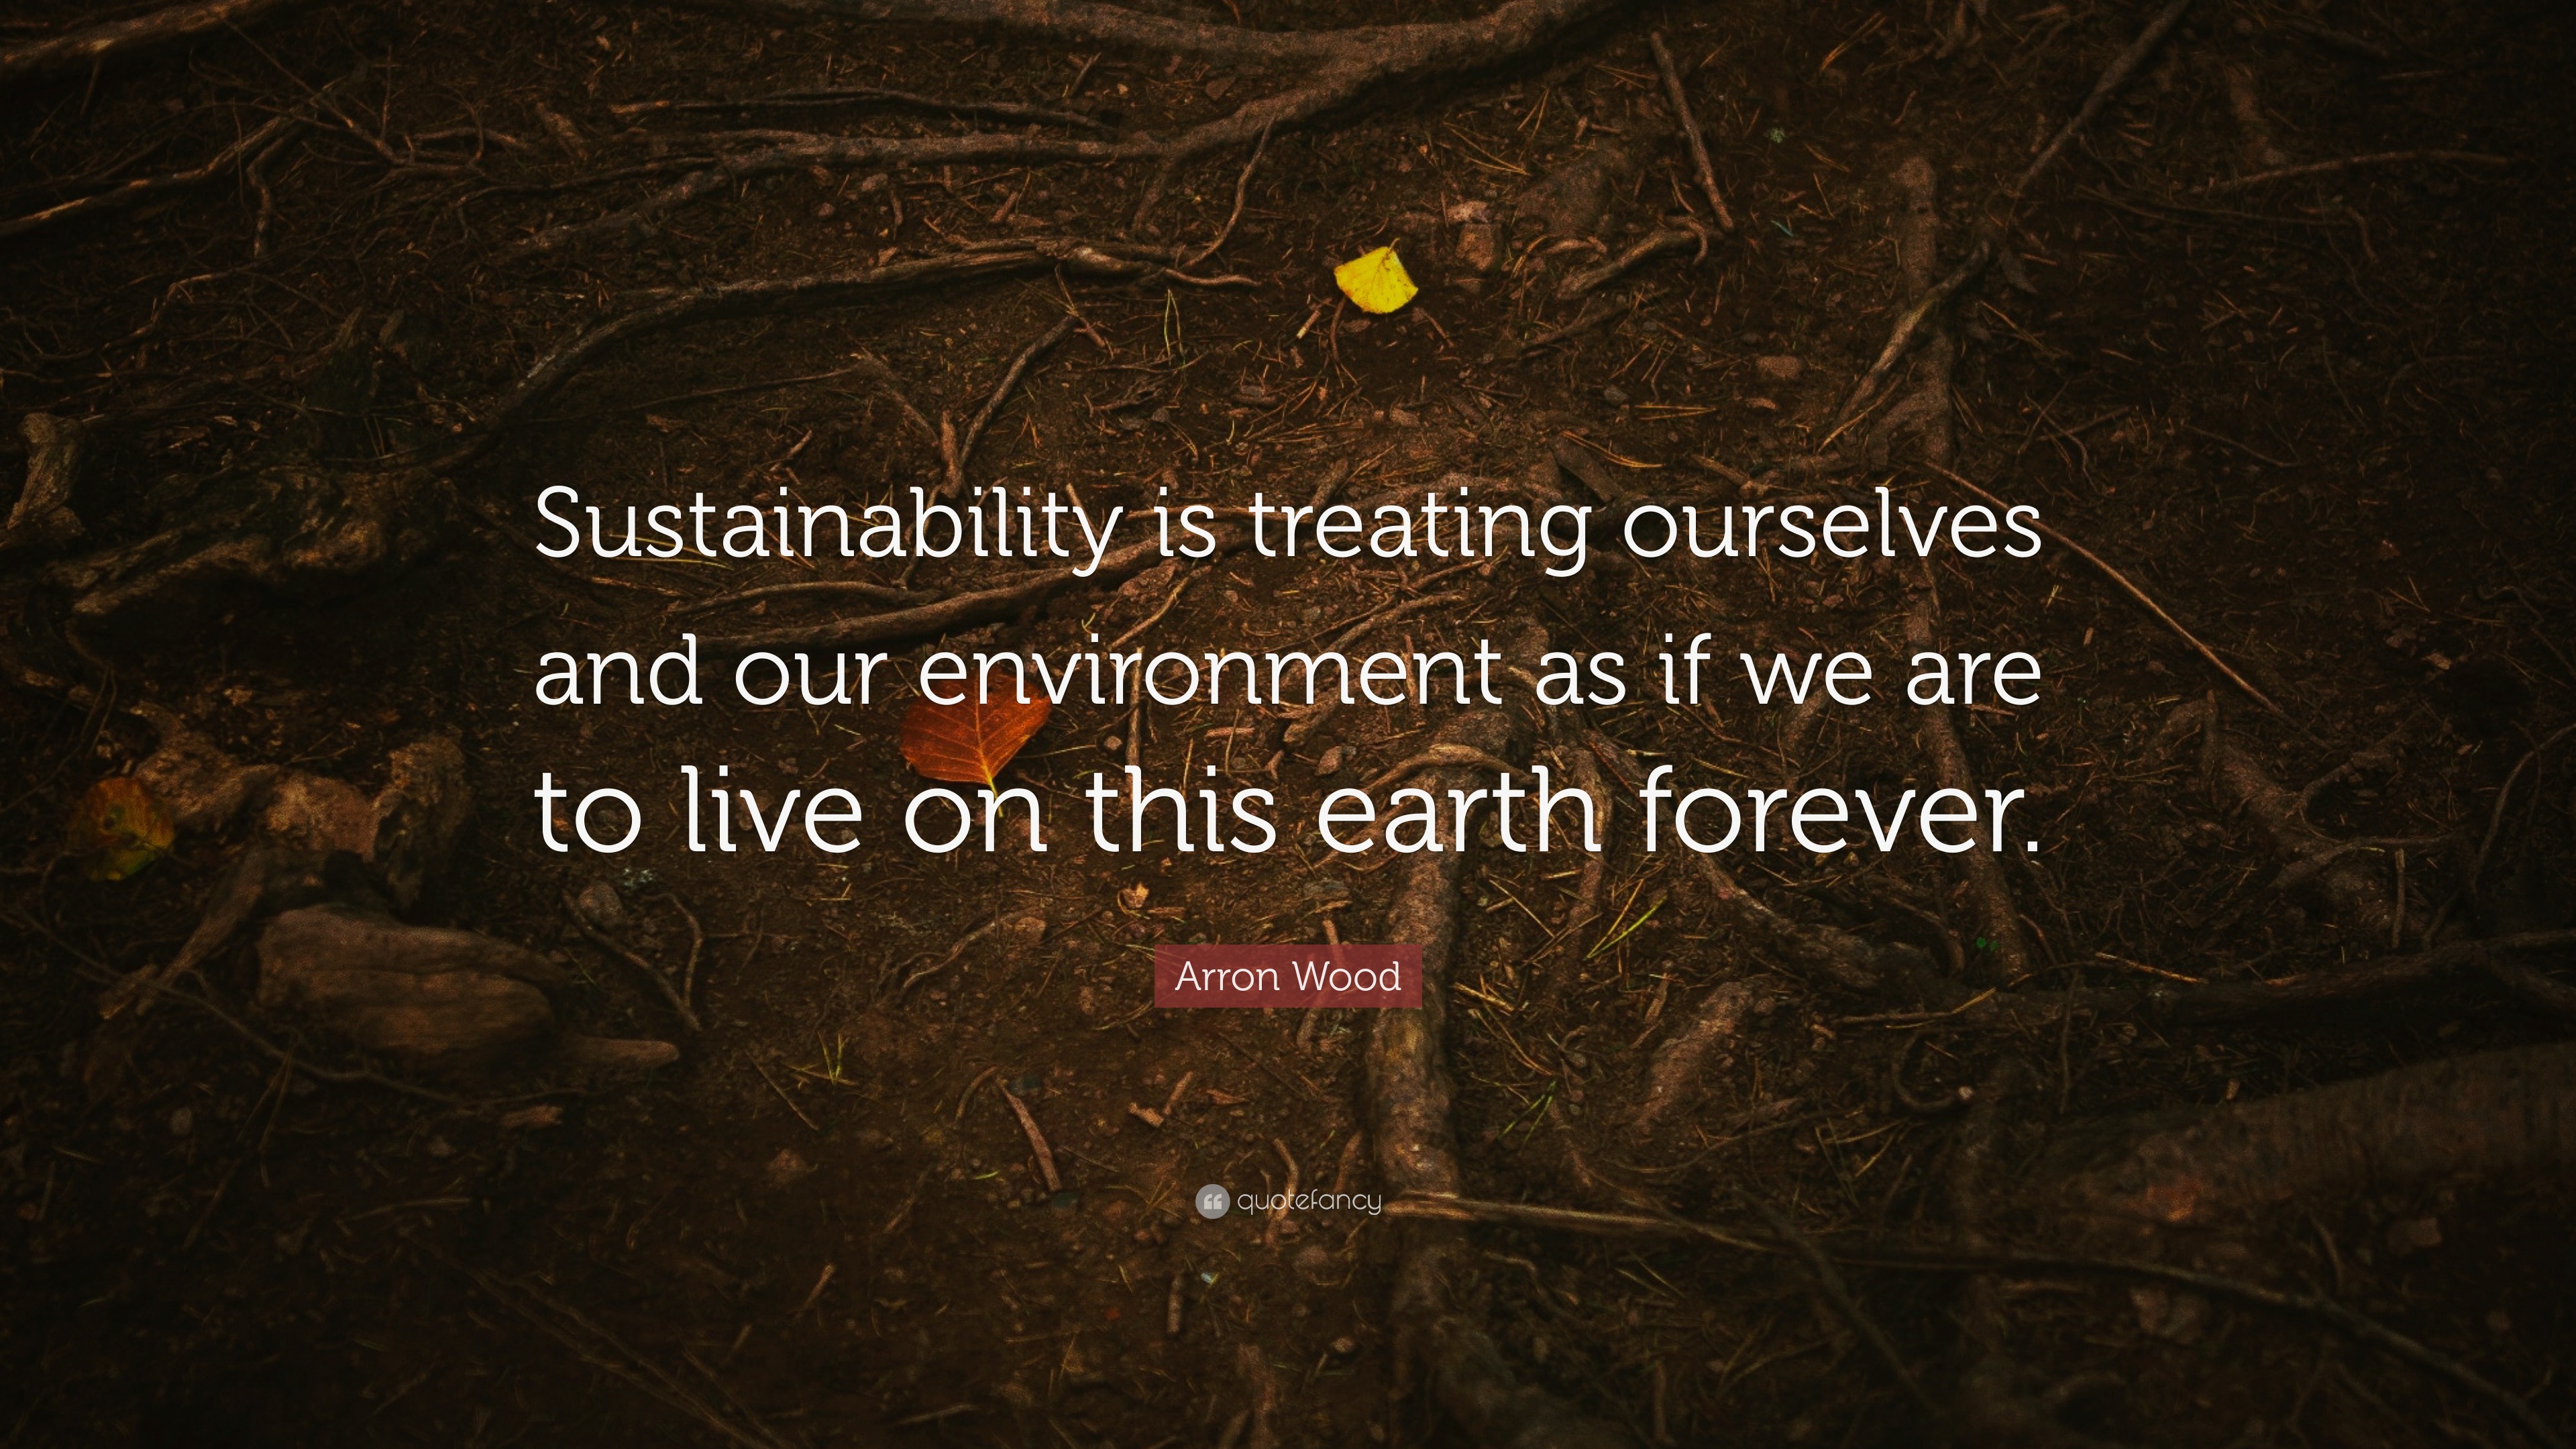 Arron Wood Quote: “Sustainability is treating ourselves and our